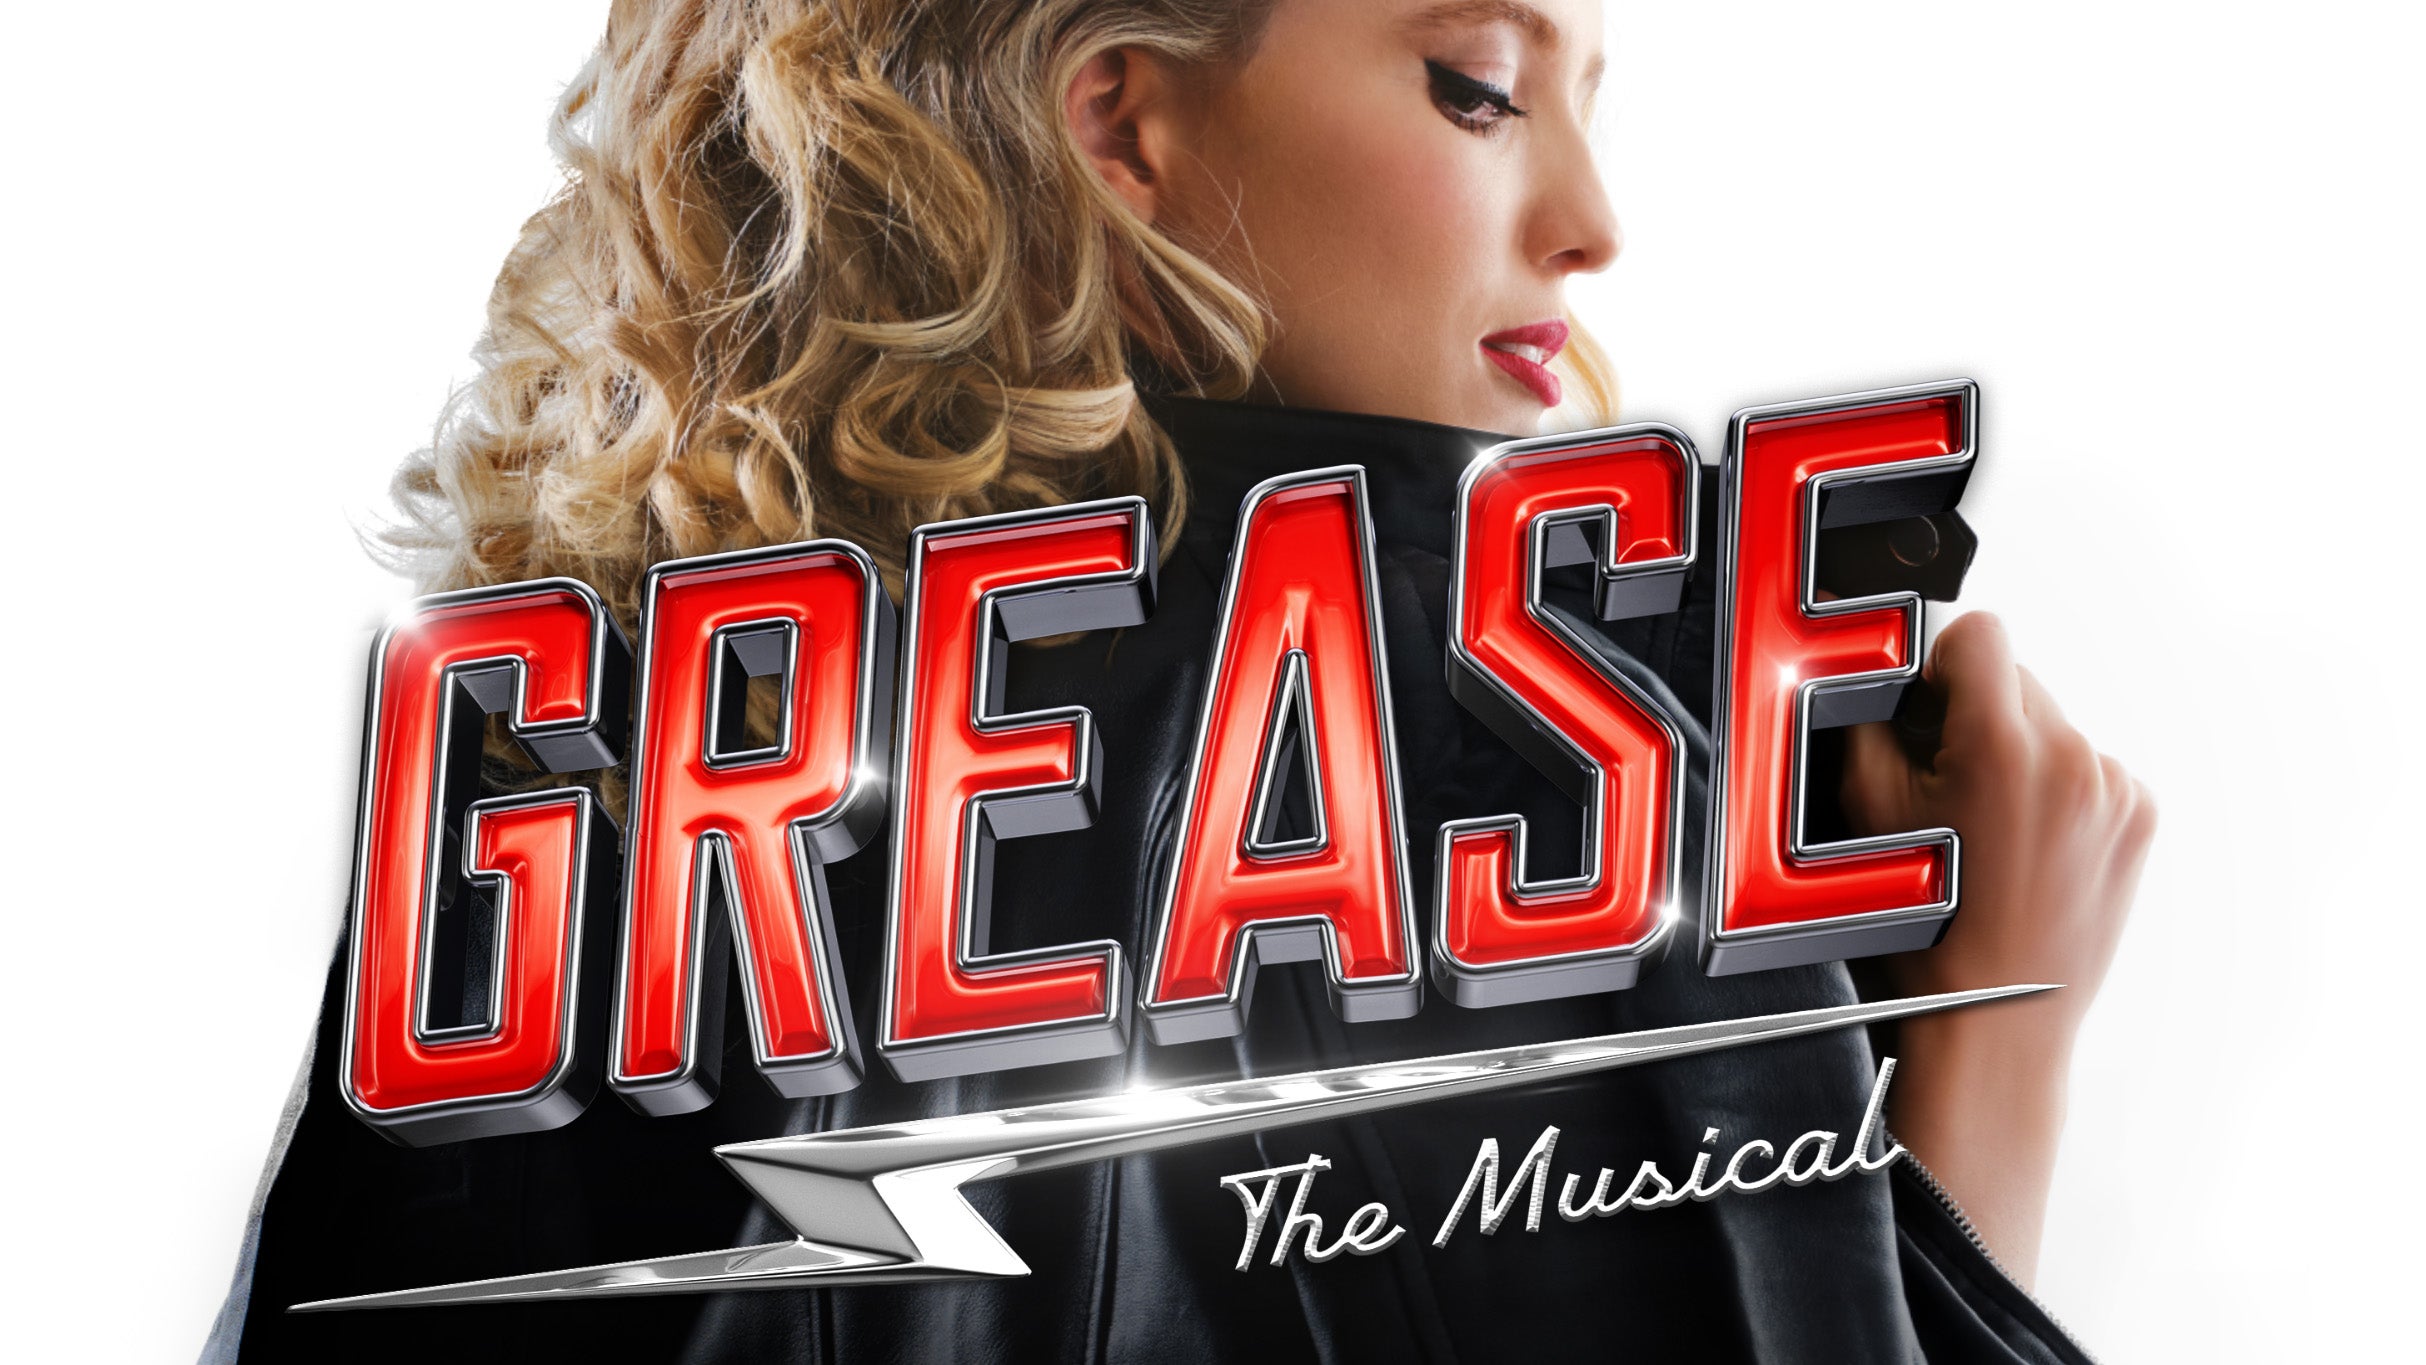 Grease - Opening Night in Burswood promo photo for Groups presale offer code